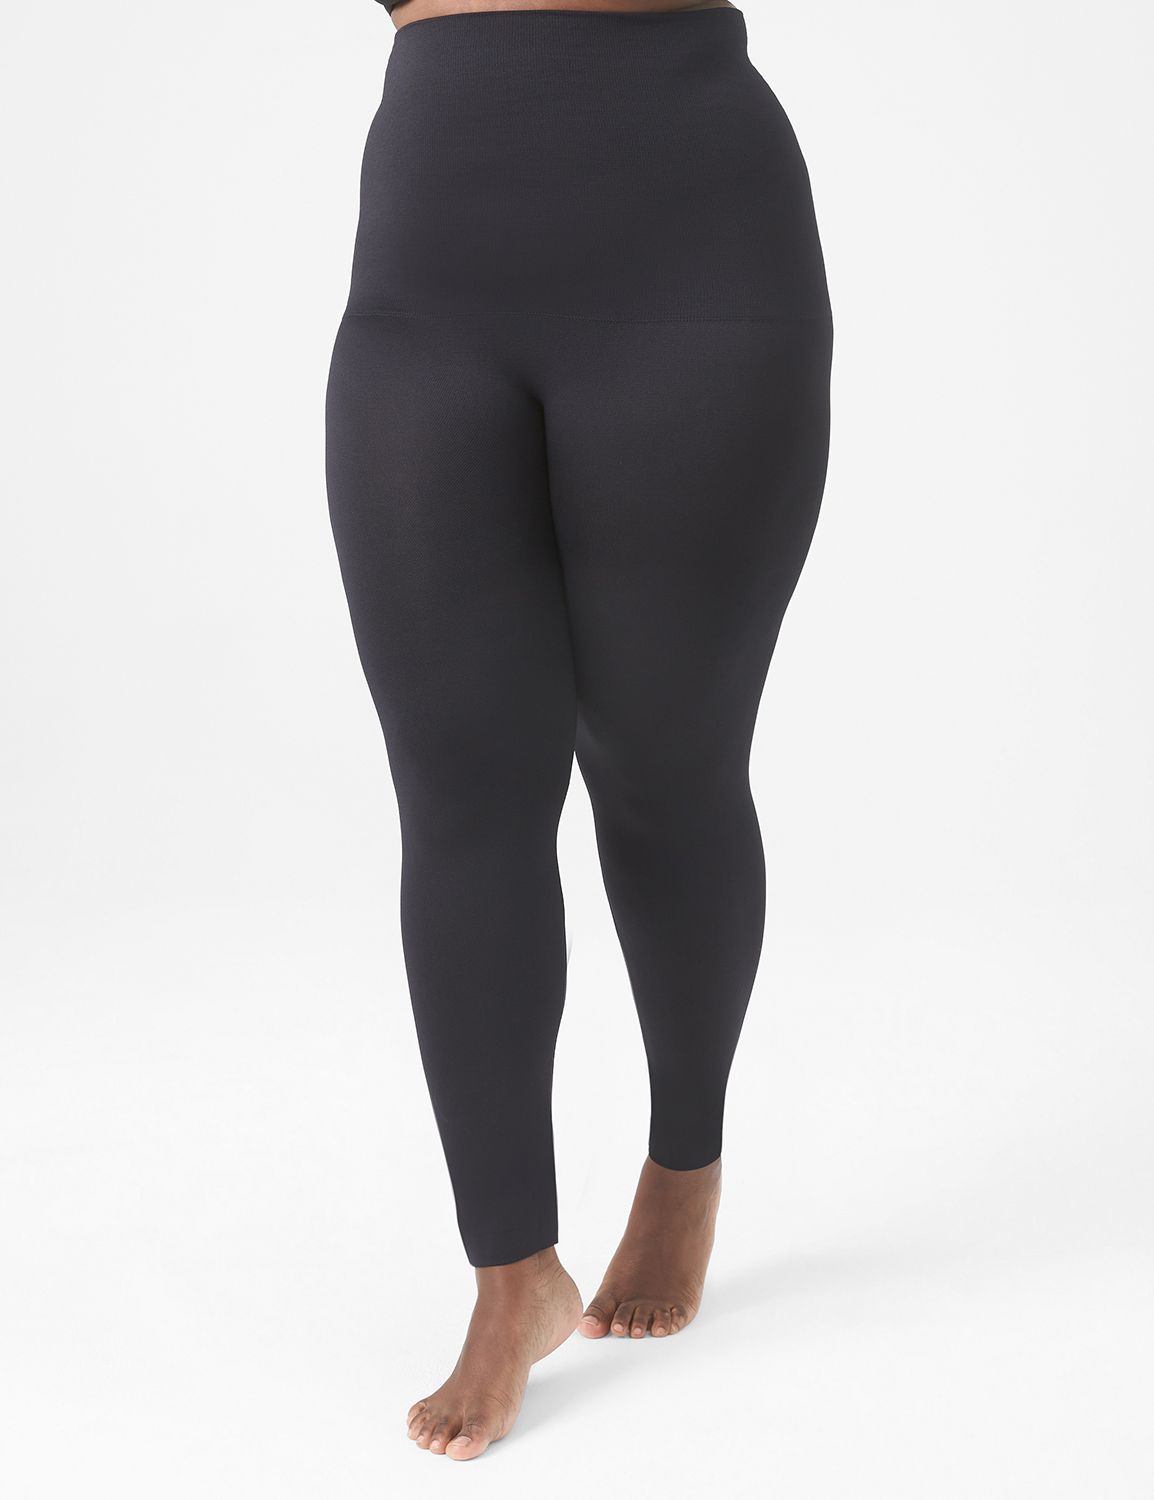  we fleece 3 Pack Plus Size Leggings for Women -Stretchy X-Large-4X  Tummy Control High Waist Spandex Workout Yoga Pants Black/Grey/Navy :  Clothing, Shoes & Jewelry